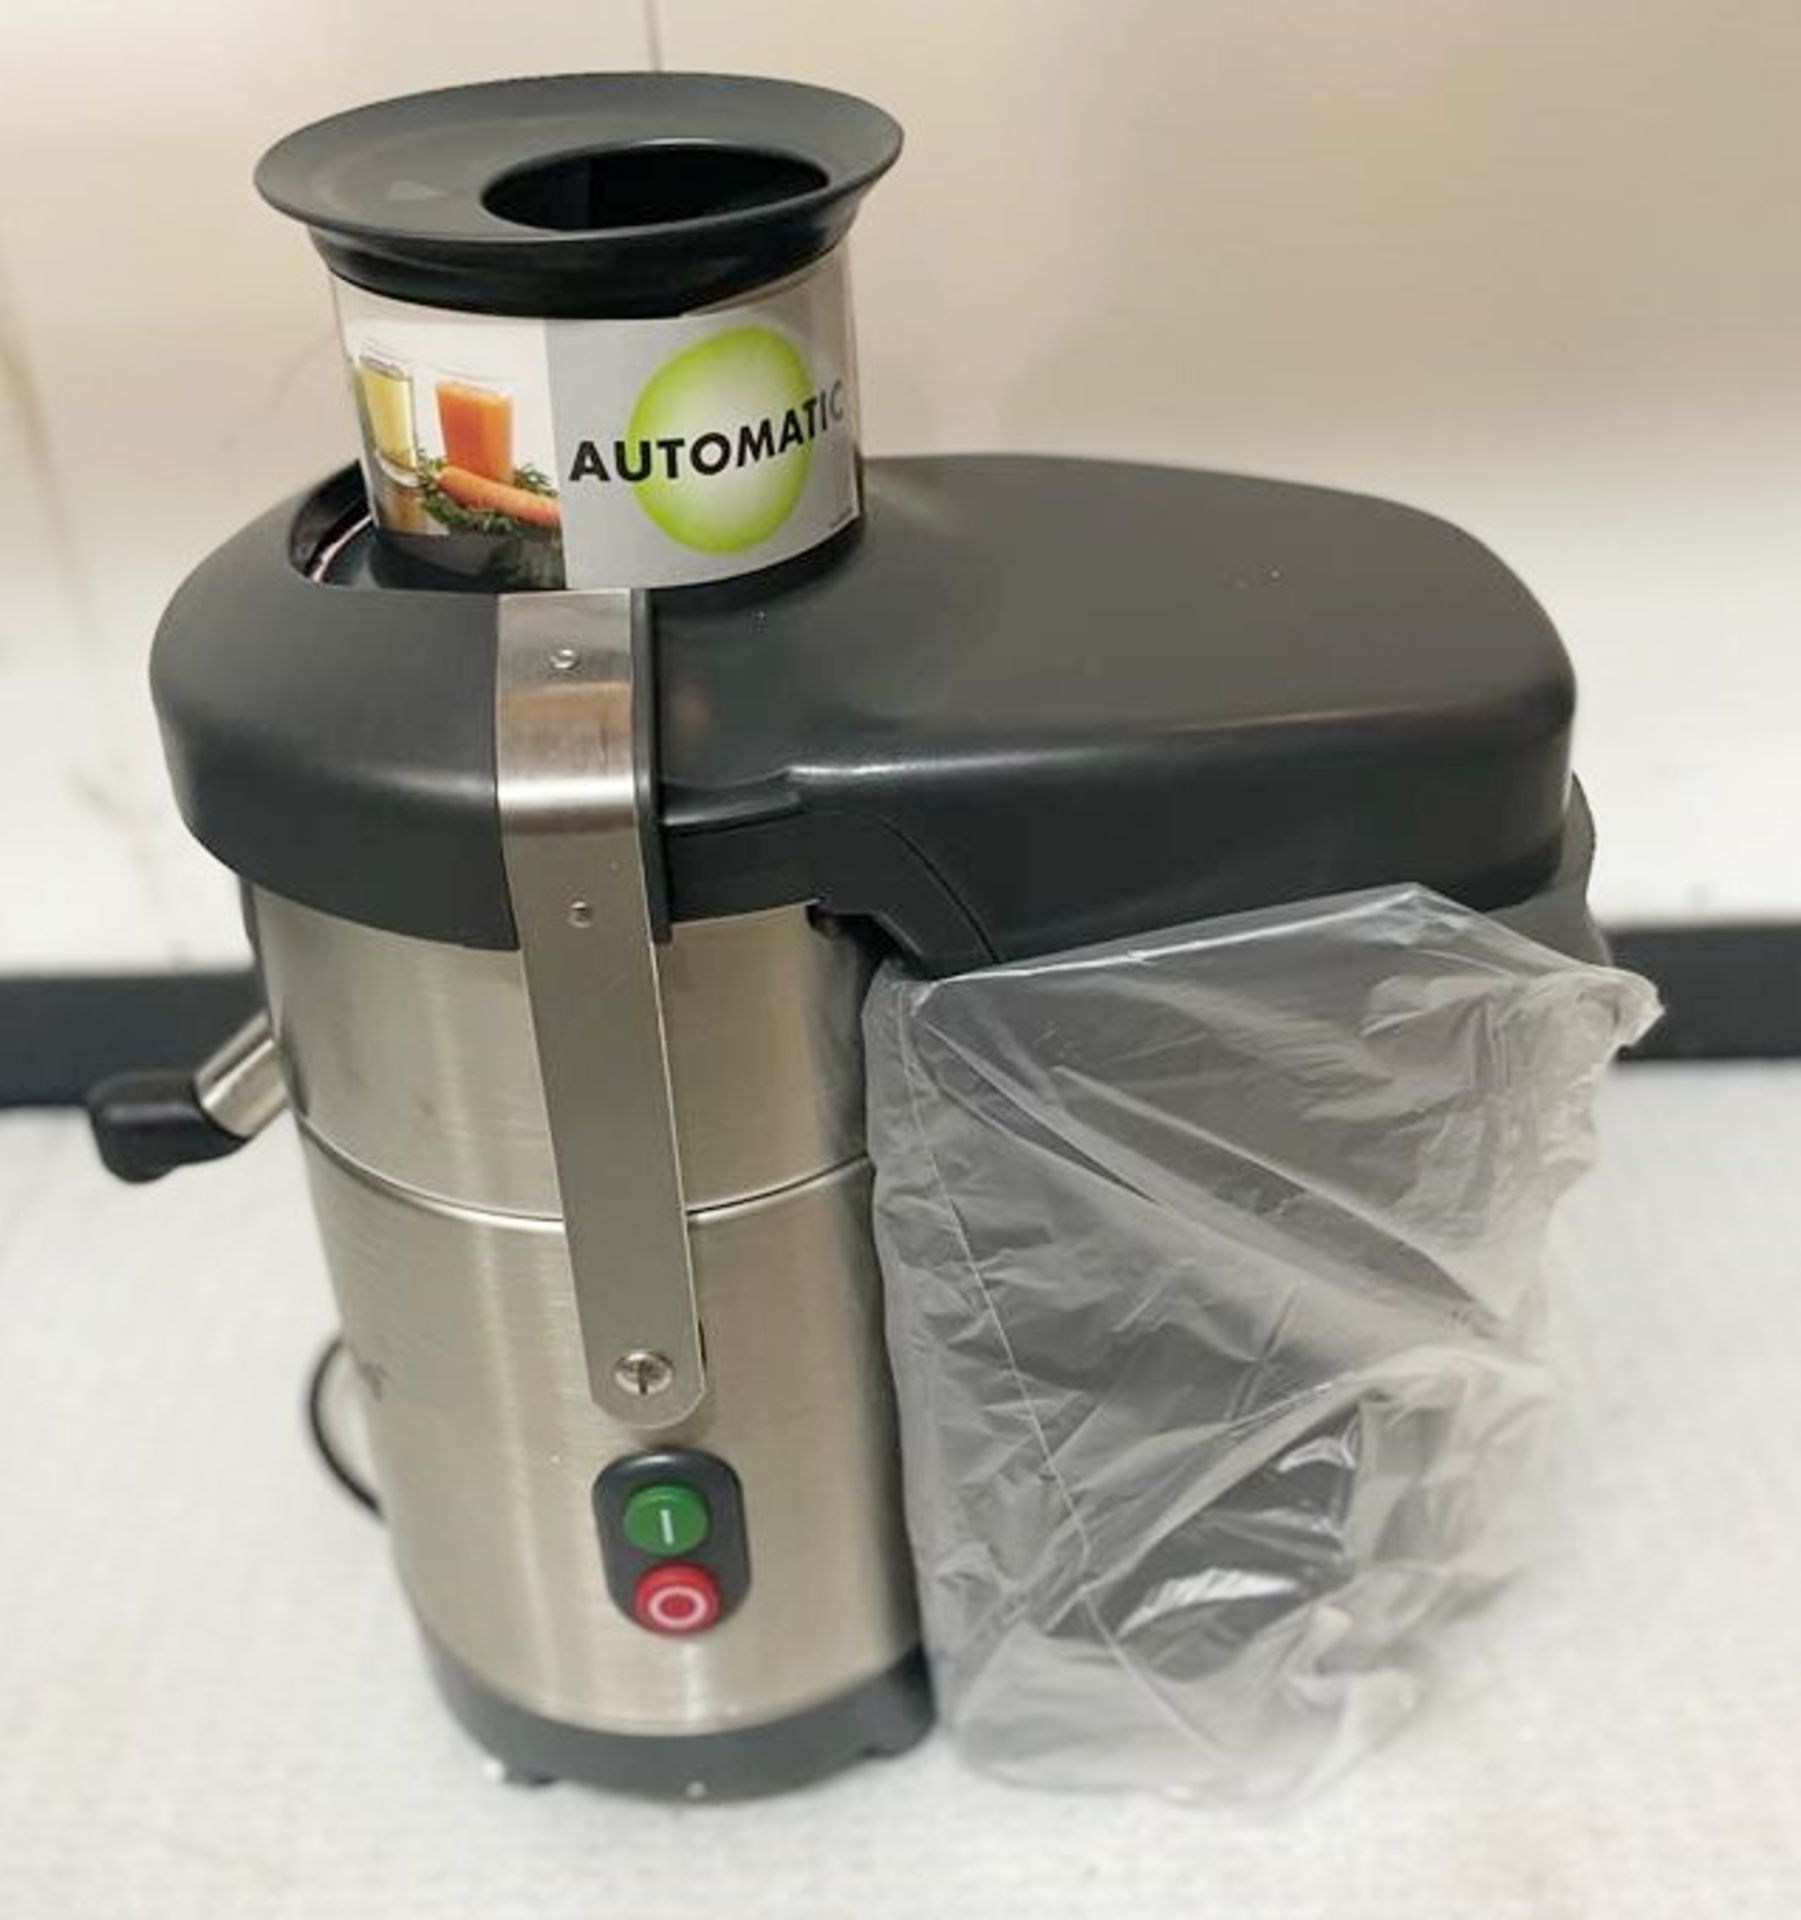 1 x Robot Coupe J100 Juice Extractor Brand New RRP £1500.00 - Ref: AUR 109- CL652 - Location: - Image 4 of 7